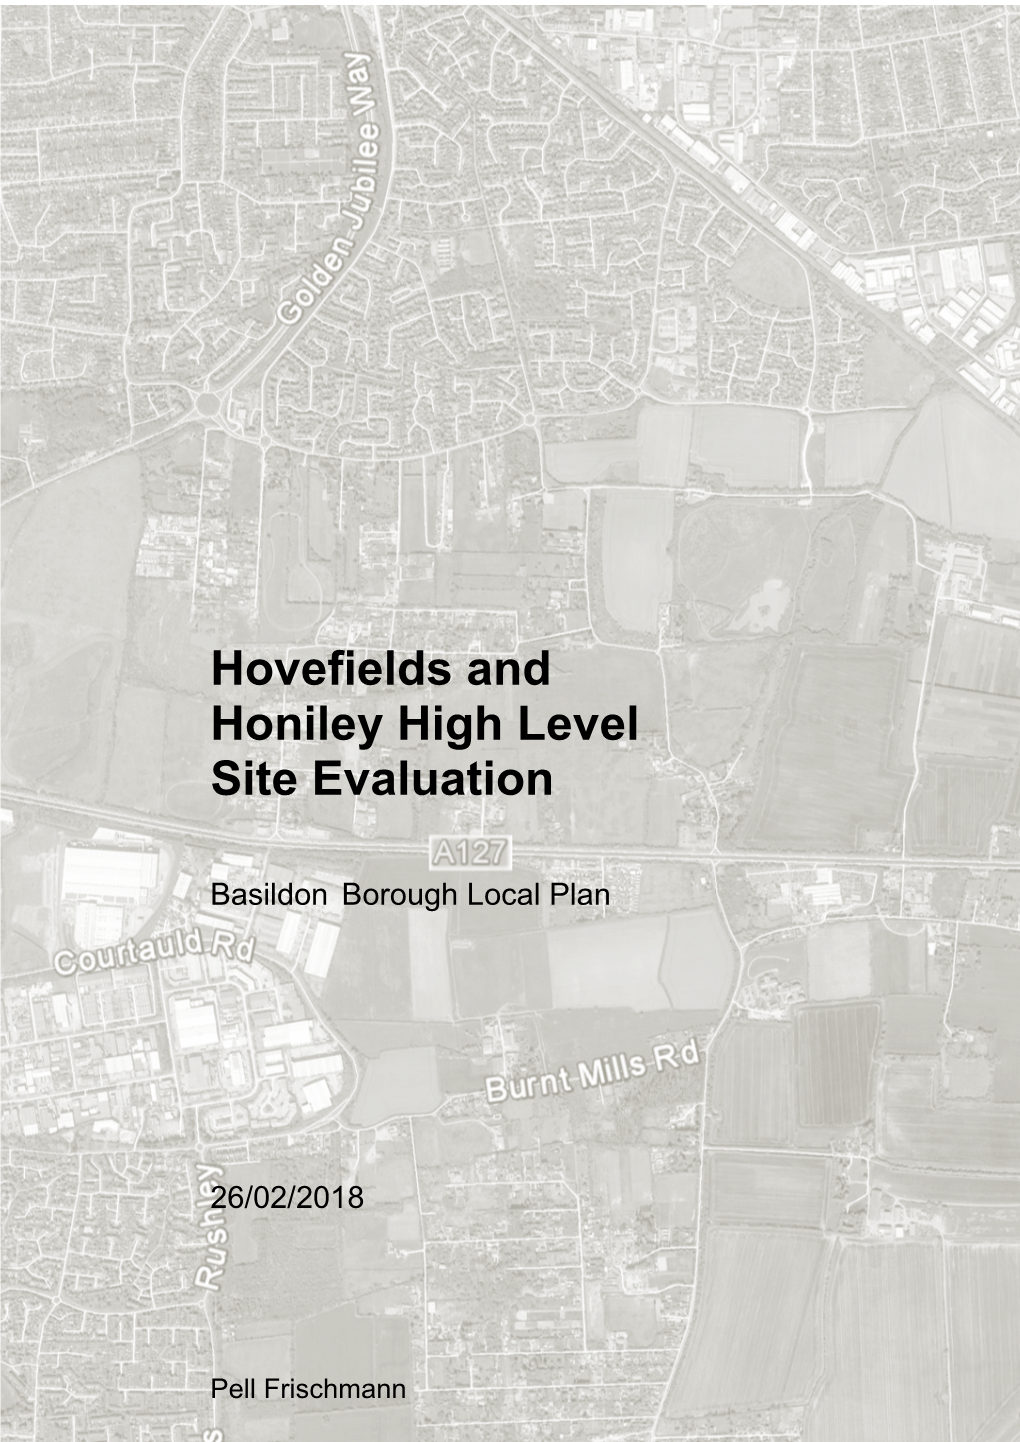 Hovefields and Honiley High Level Site Evaluation